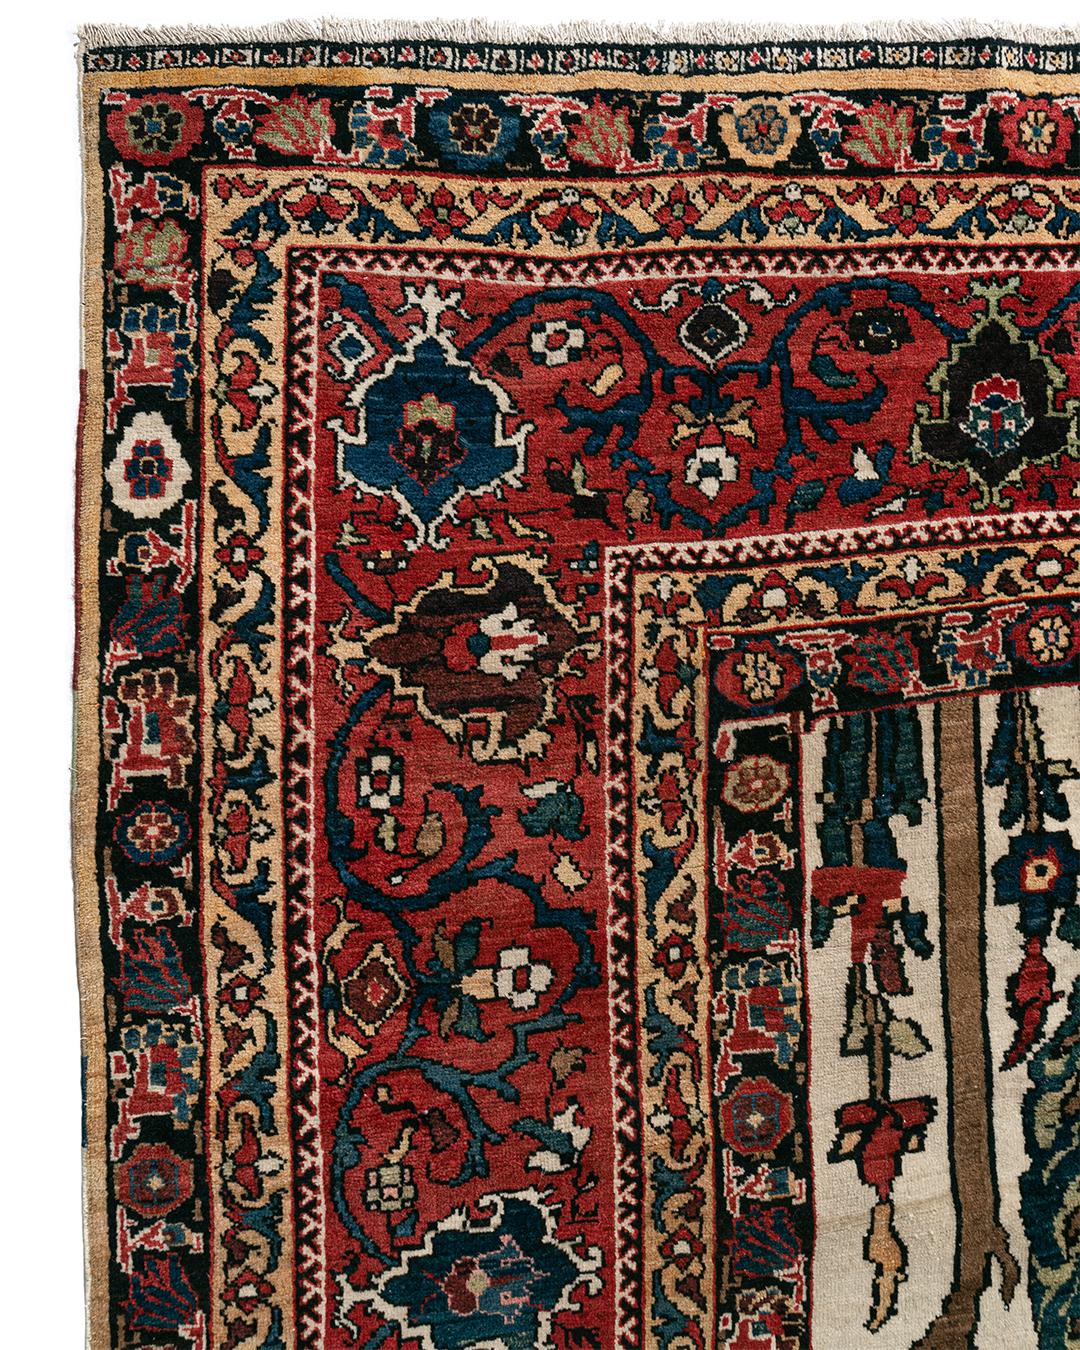 Oversize antique Persian Baktiari rug, circa 1890. Measures: 12' x 18'10. Feeling like a VIP? Like a person of importance? Maybe this mansion-size antique Persian carpet with a white field and an inscription indicating it was woven in the early 20th